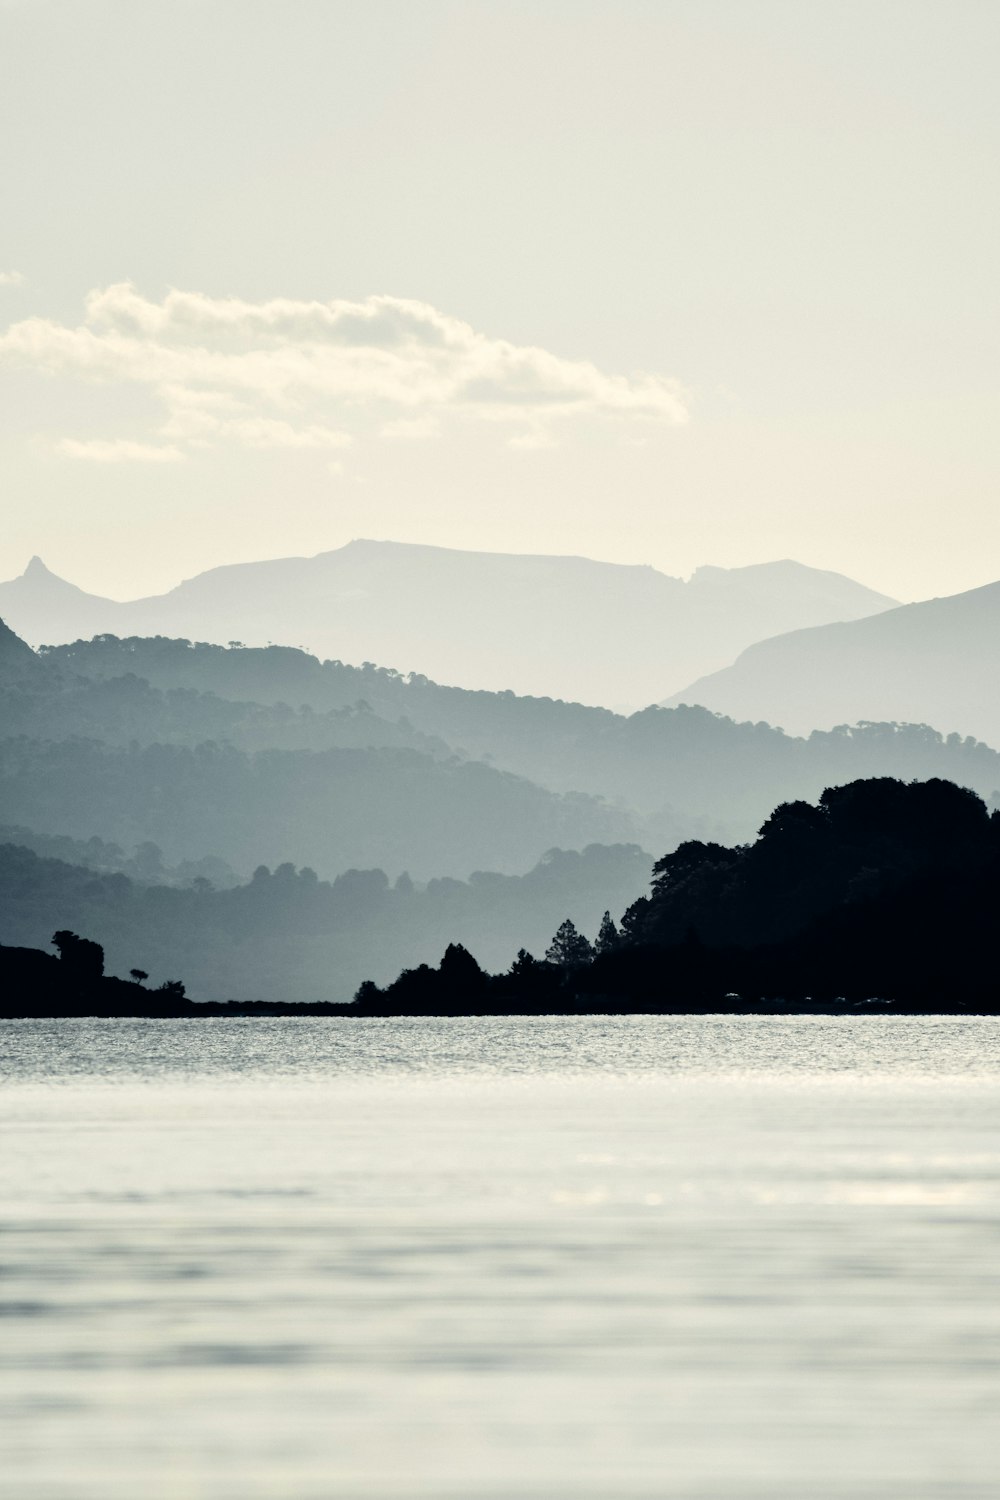 silhouette of mountain near body of water during daytime